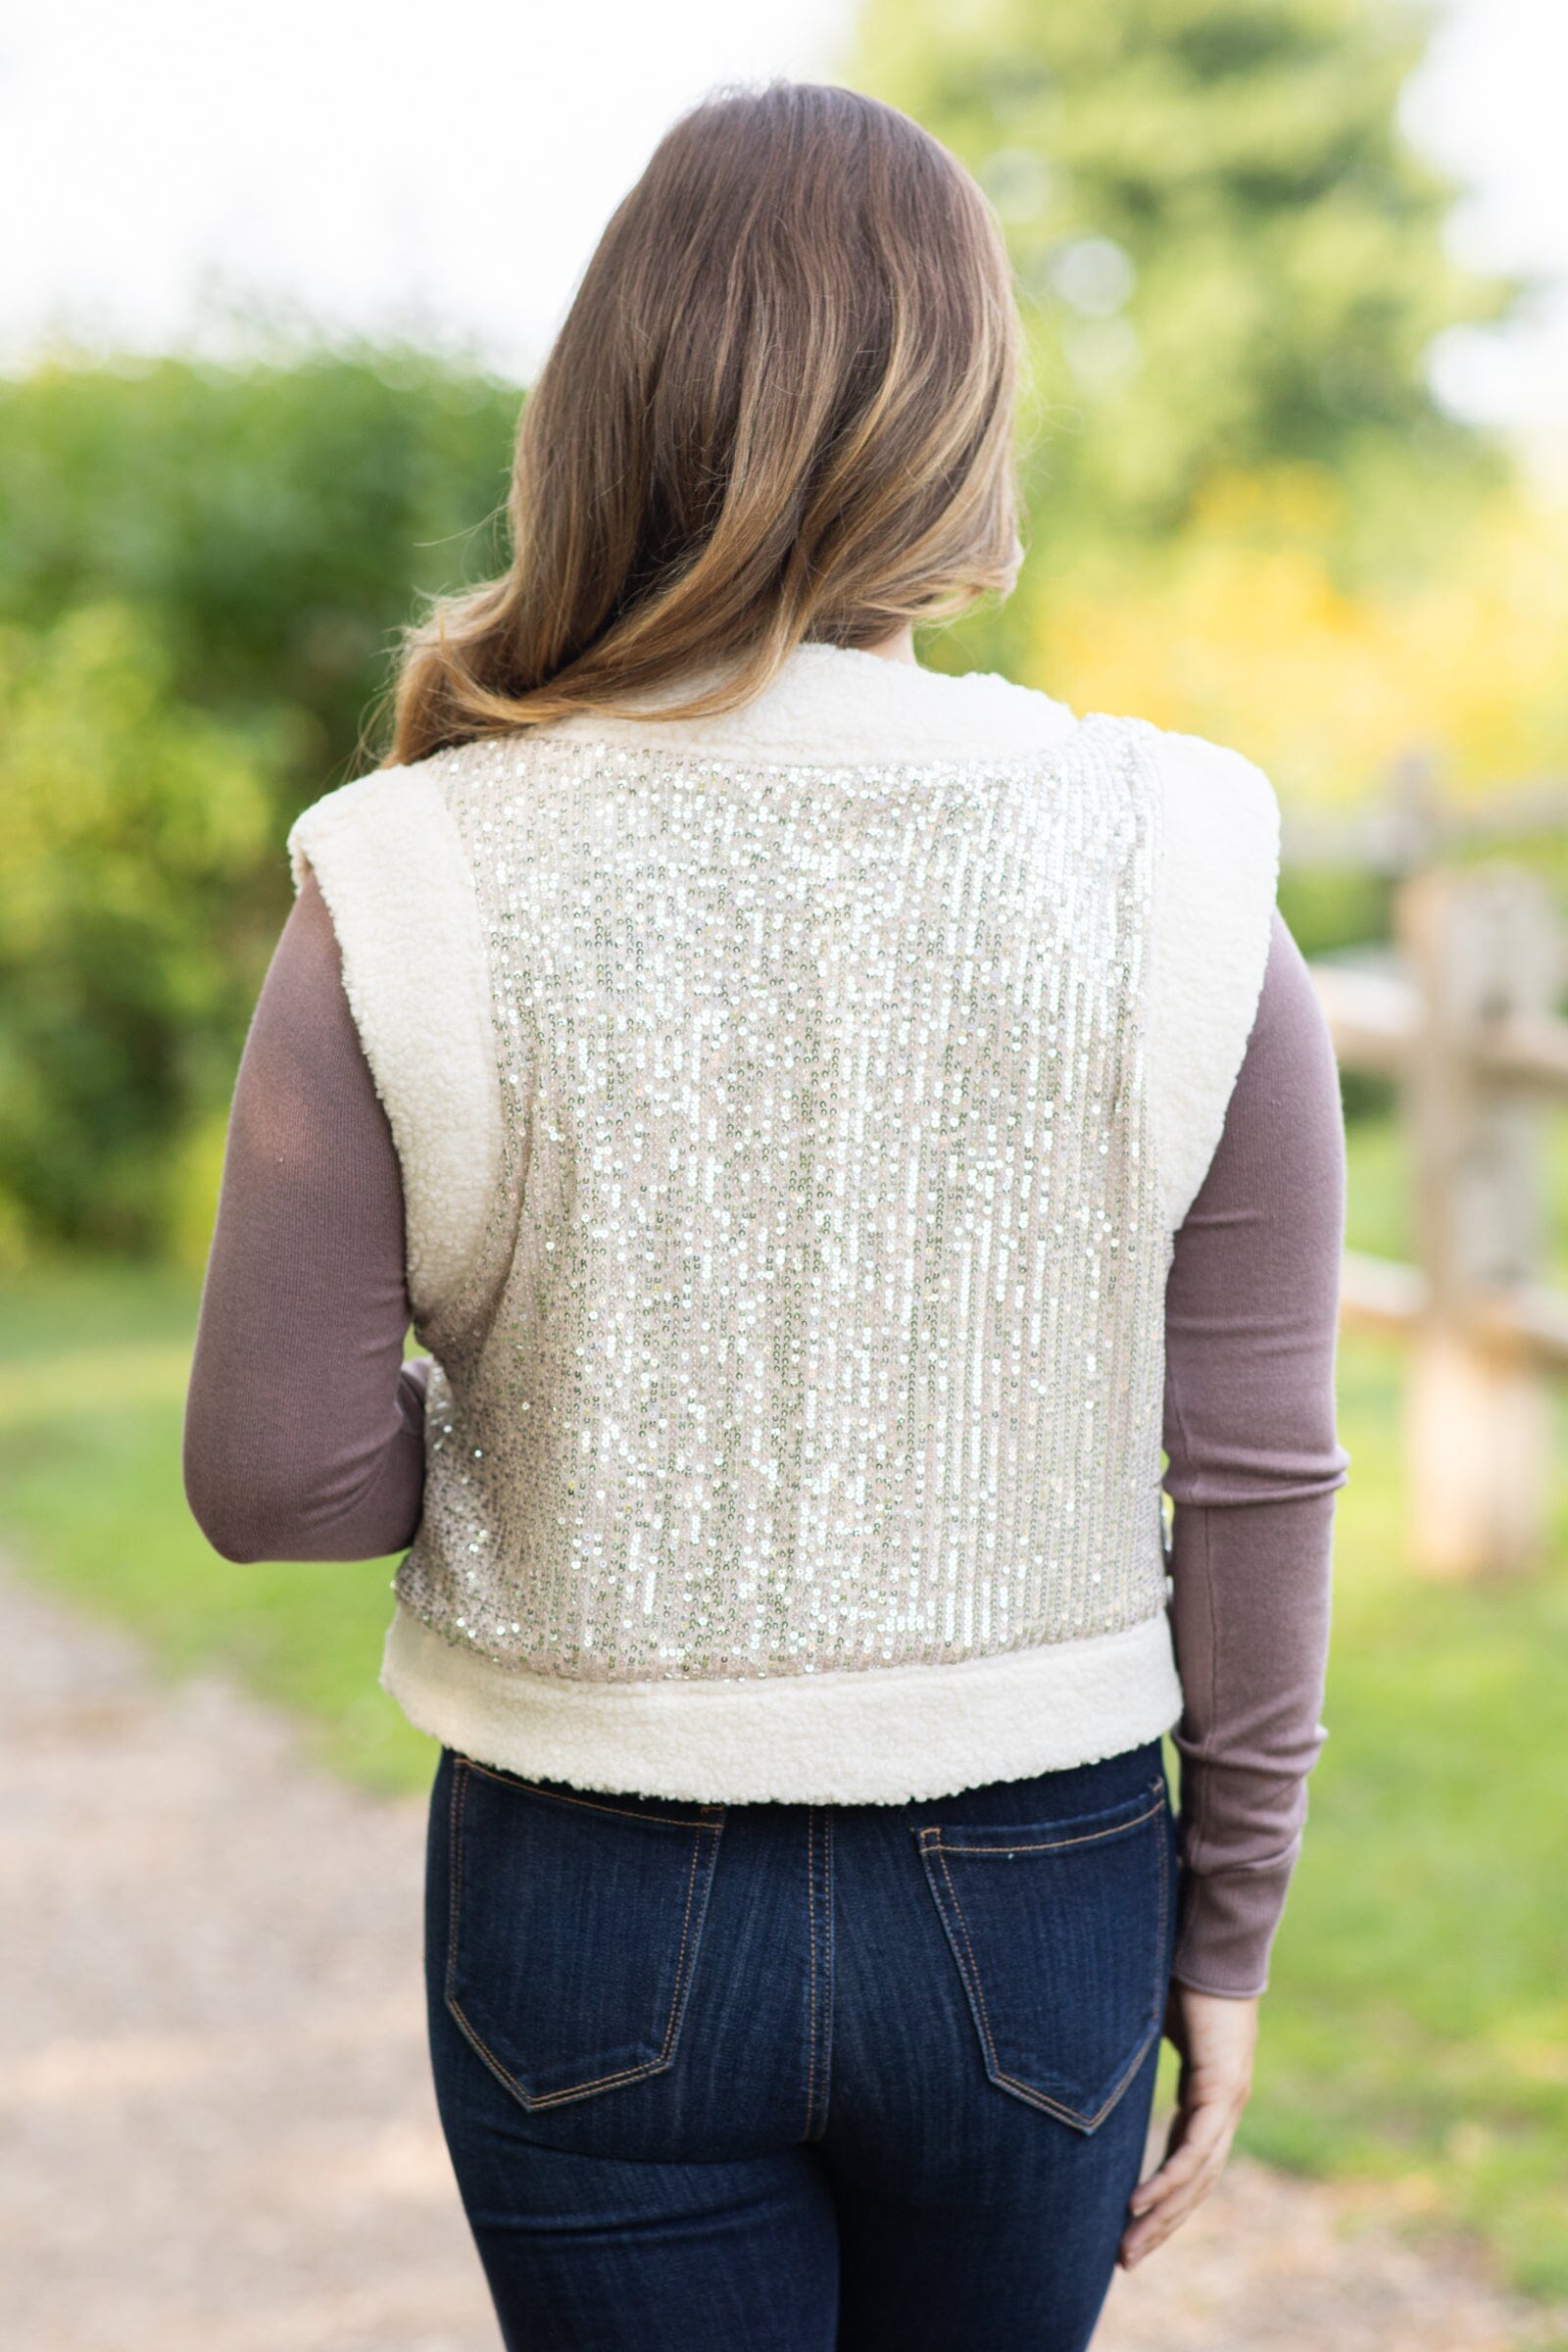 Cream and Silver Glitter Faux Fur Vest - Filly Flair